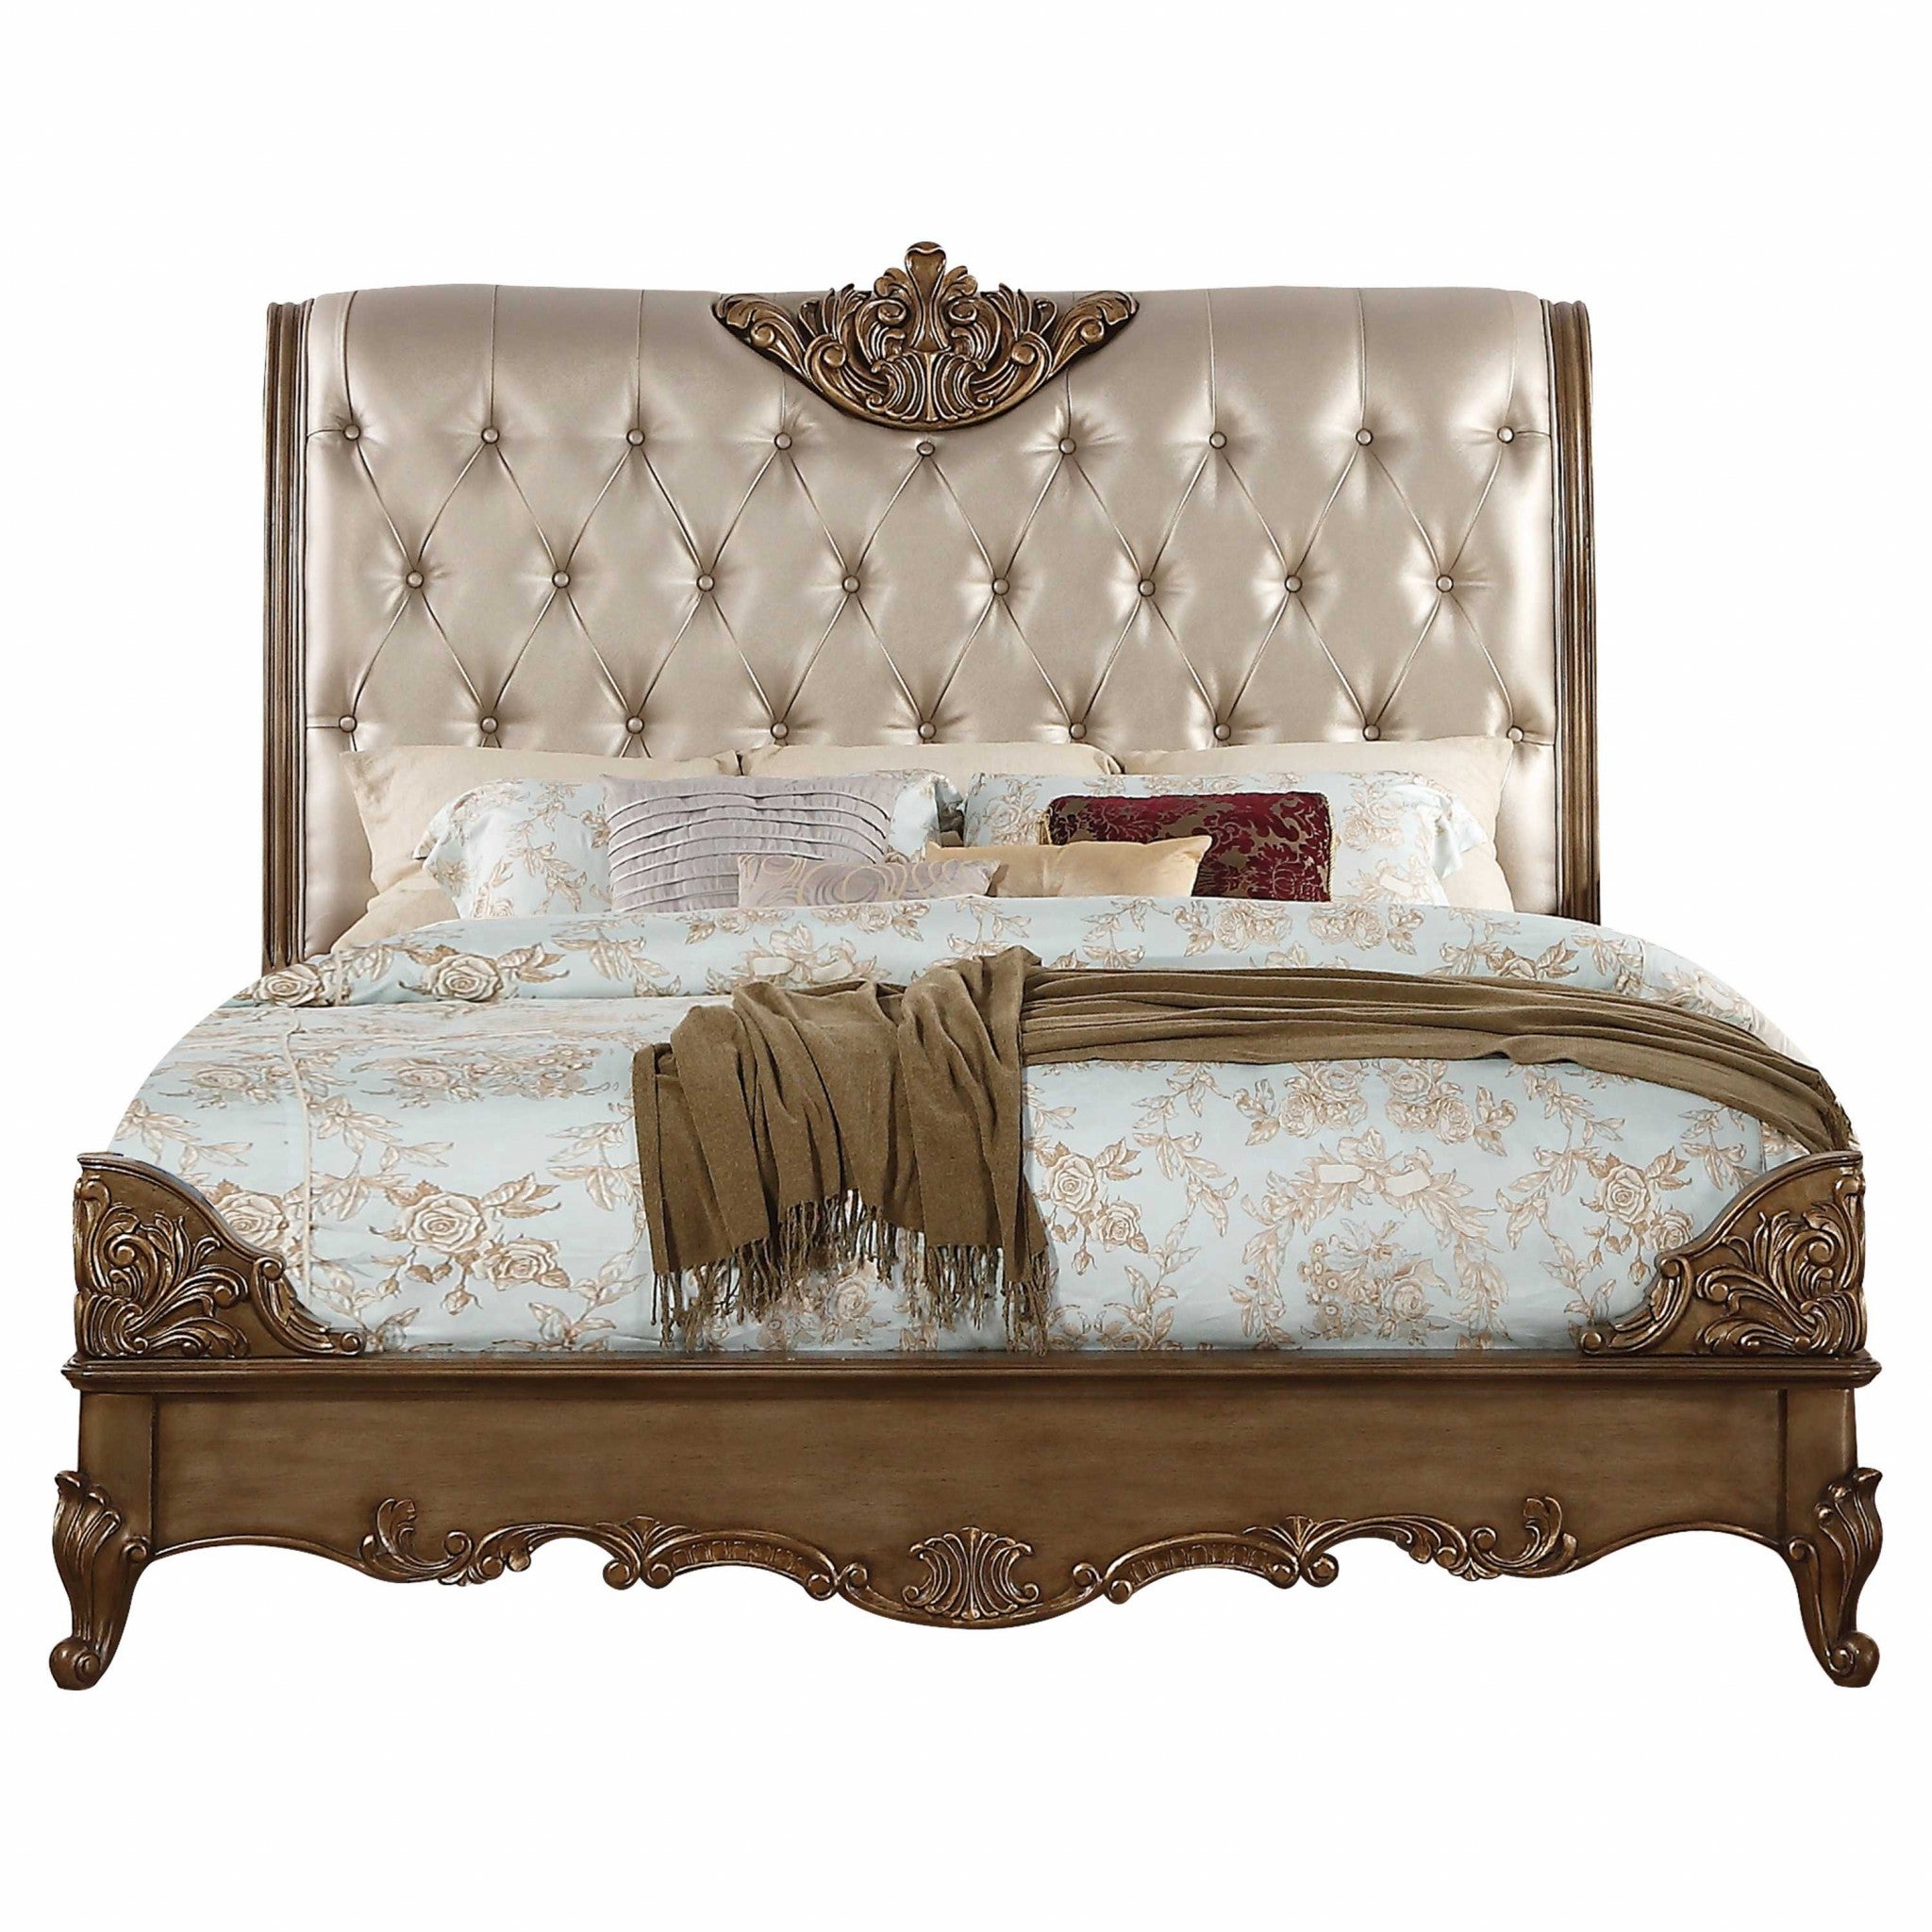 85" X 103" X 71" Champagne PU Antique Gold Wood Upholstered HB Eastern King Bed Default Title